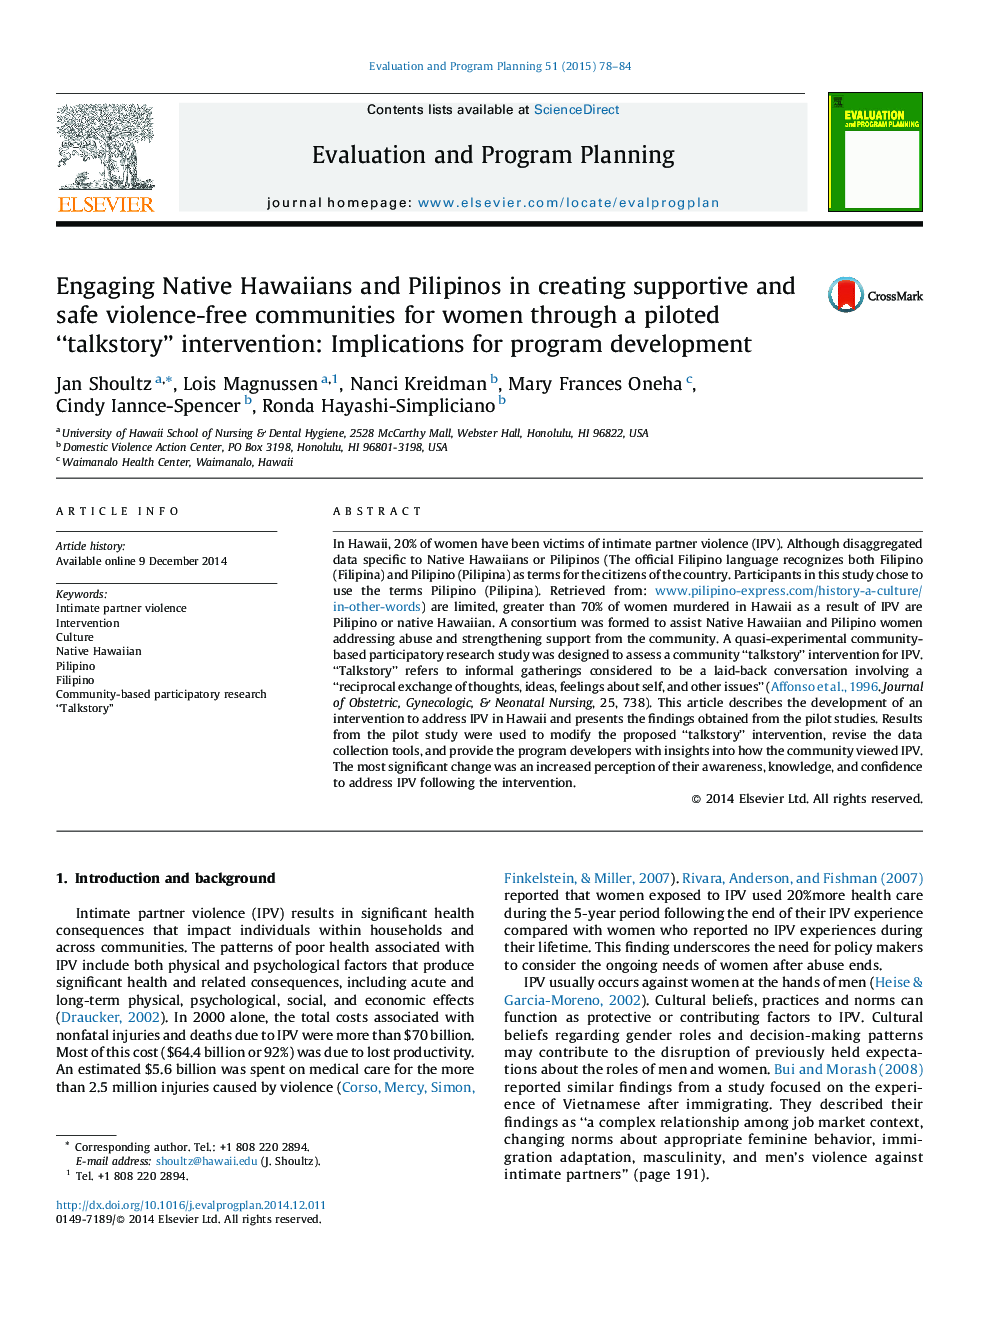 Engaging Native Hawaiians and Pilipinos in creating supportive and safe violence-free communities for women through a piloted “talkstory” intervention: Implications for program development